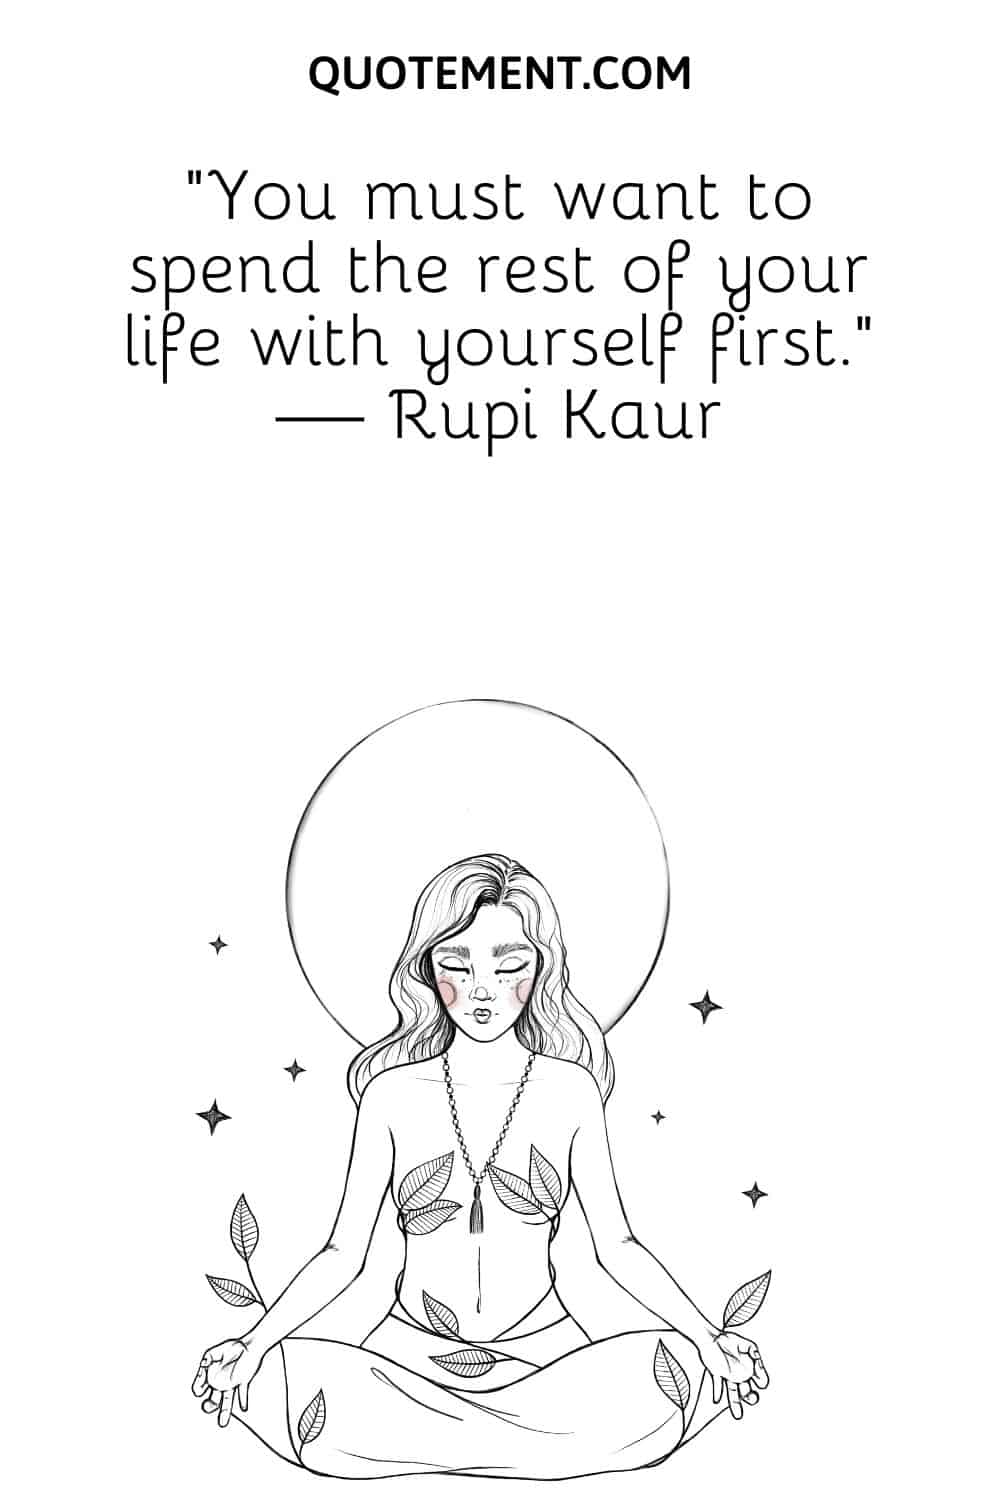 You must want to spend the rest of your life with yourself first